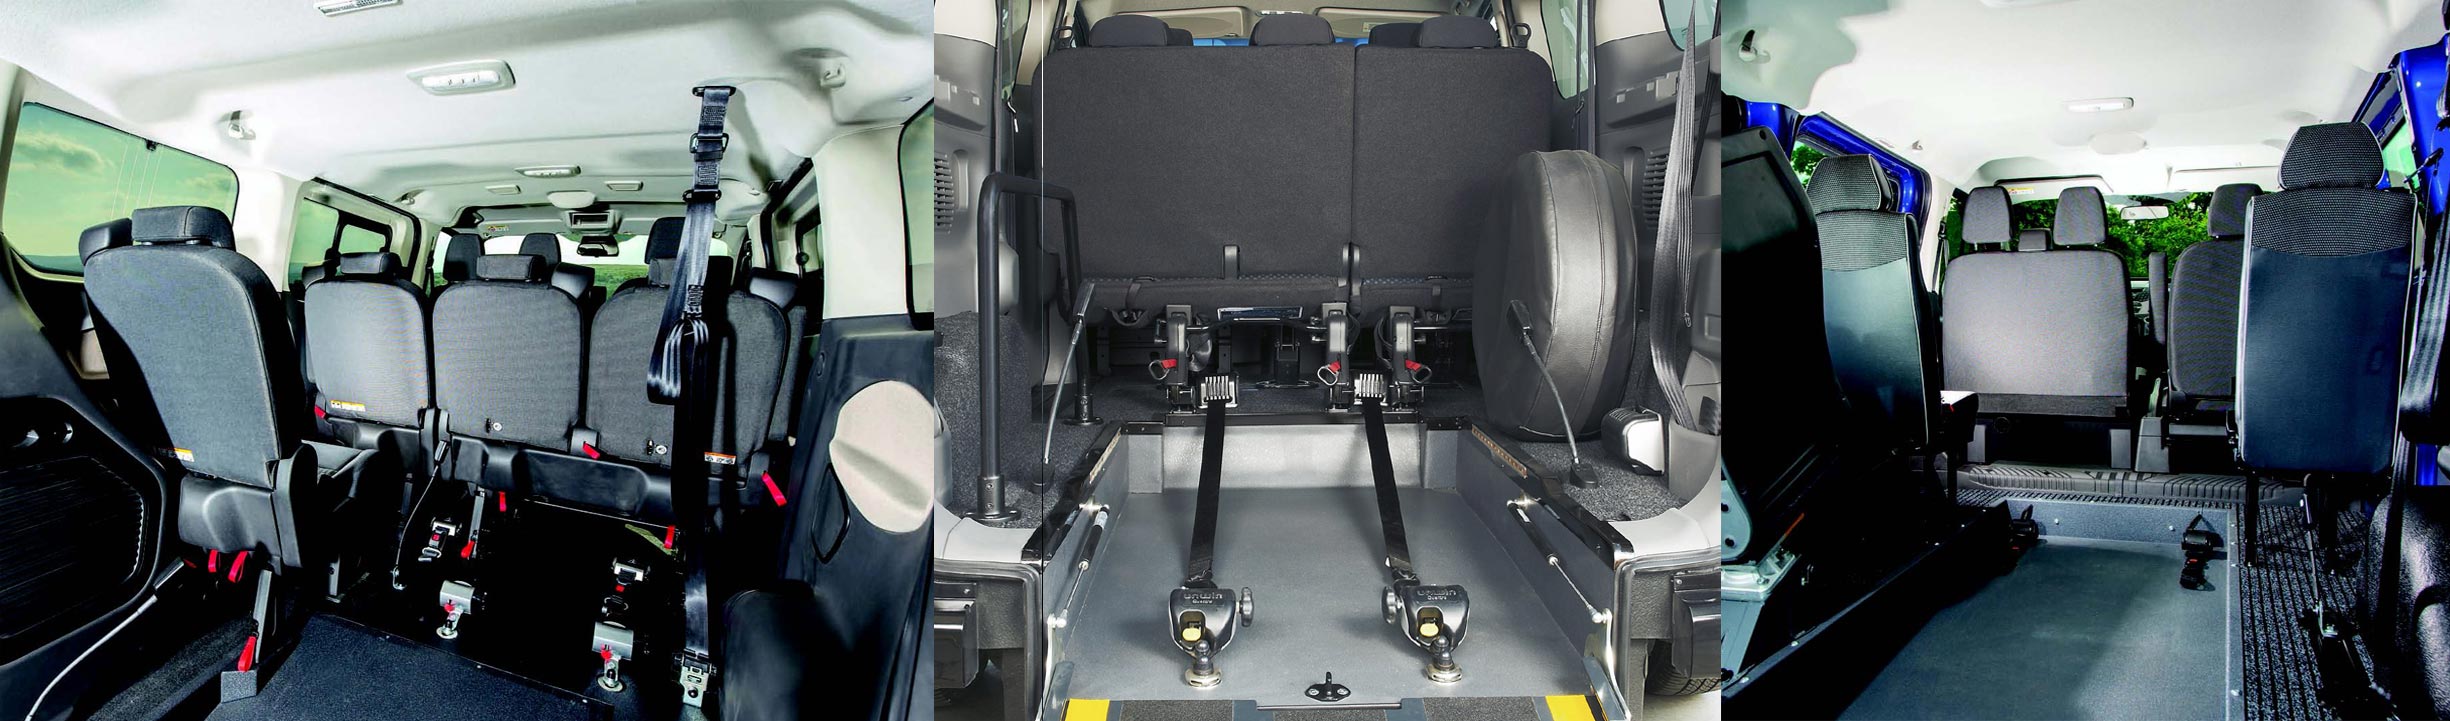 Wheelchair Accessible Vehicle Kit inside